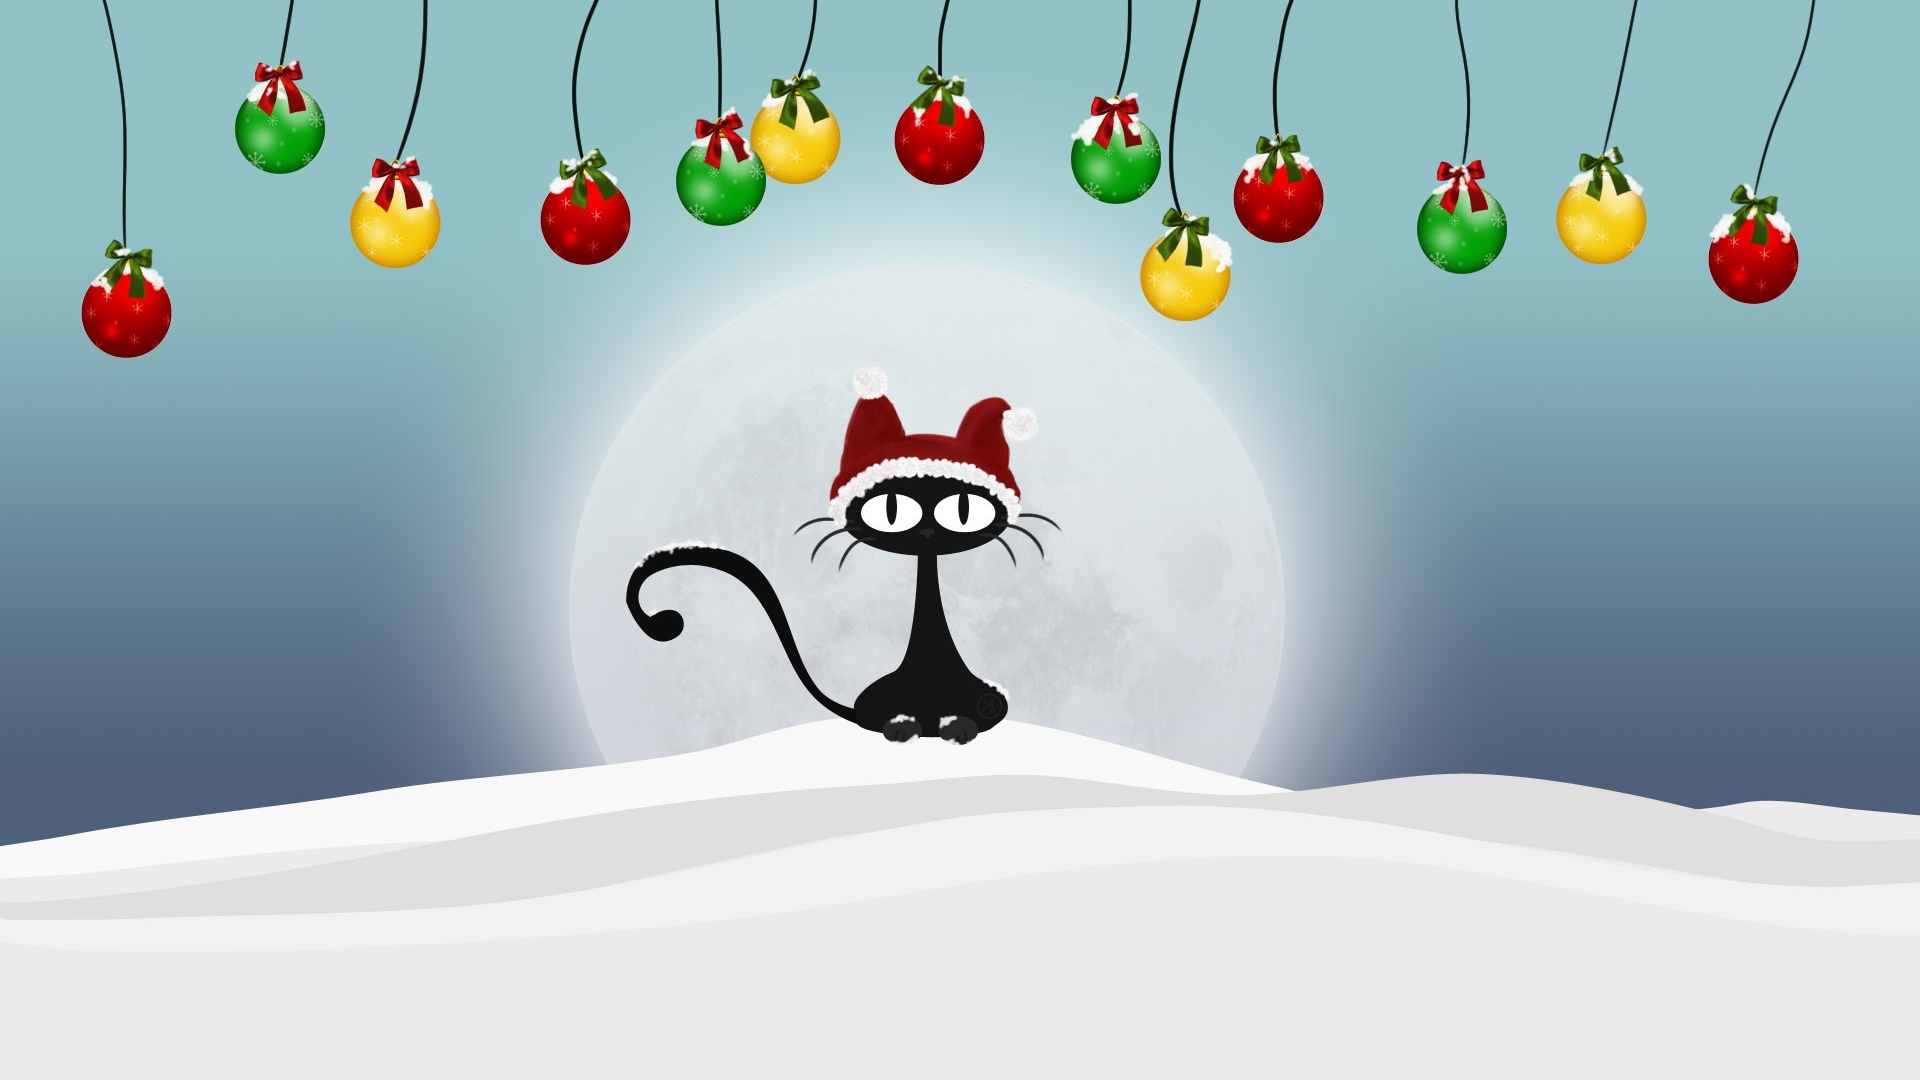 Funny Christmas Wallpaper and HD Background free download on PicGaGa